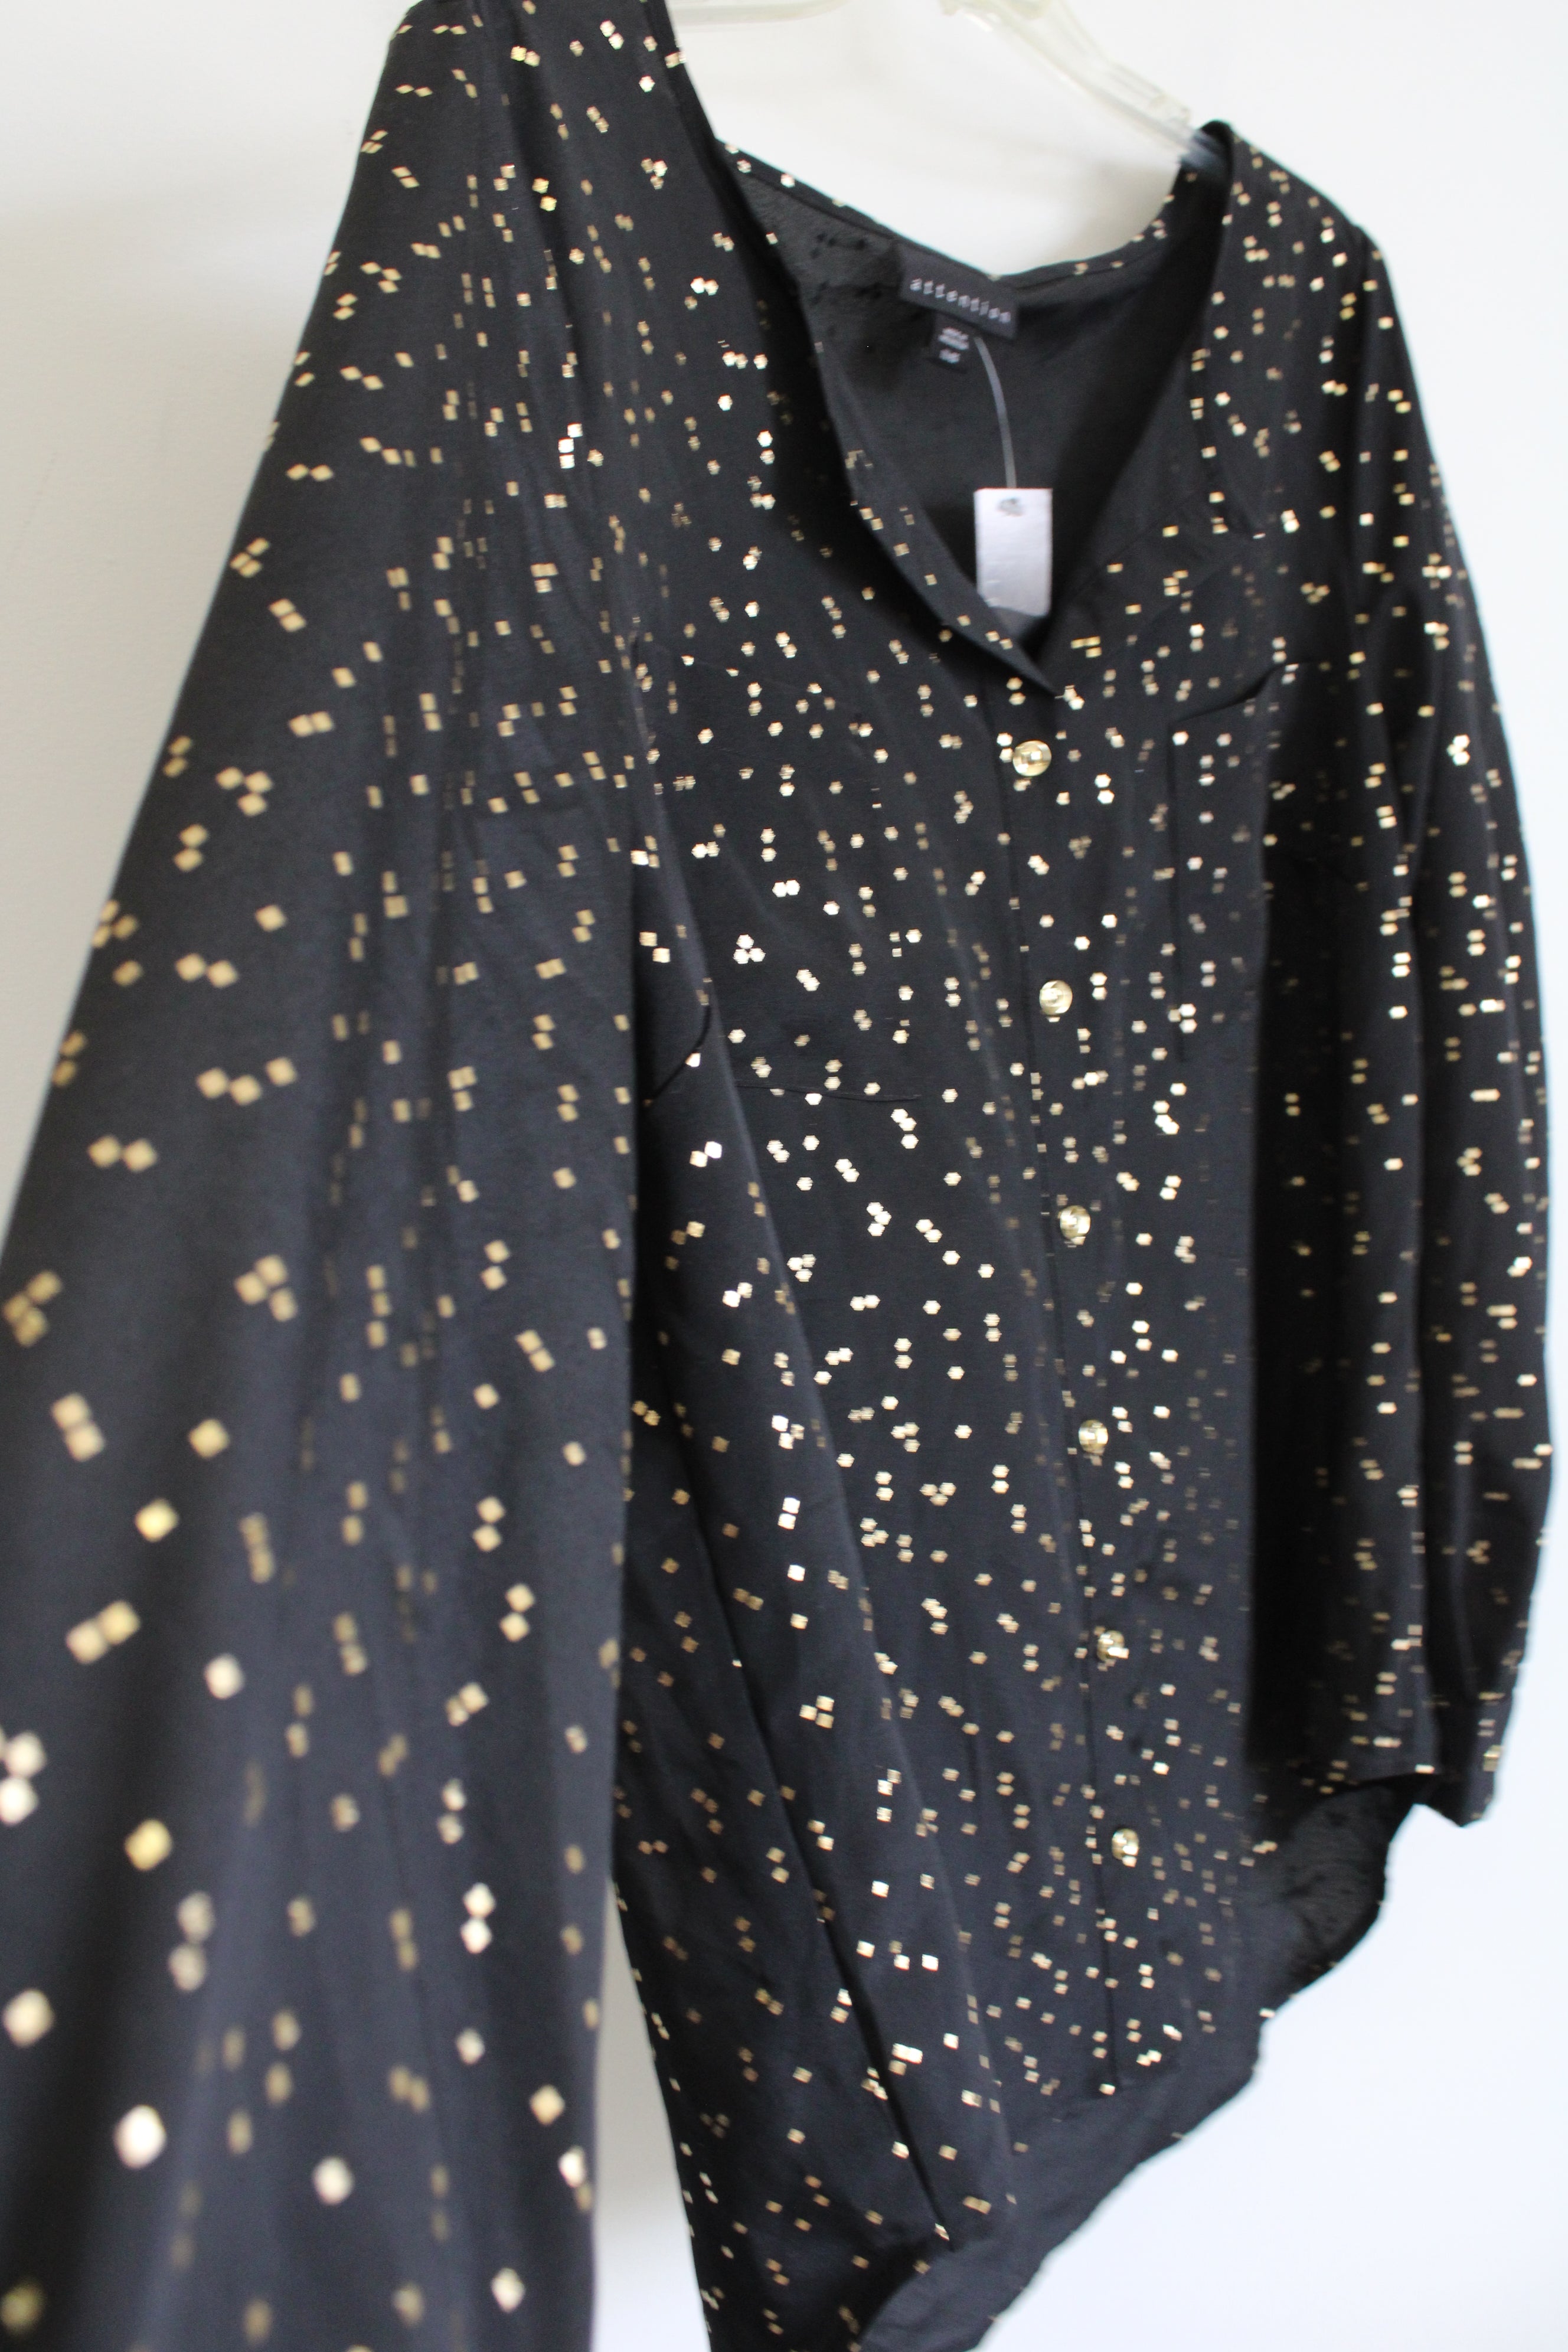 NEW Attention Black Gold Speckled Blouse | XL